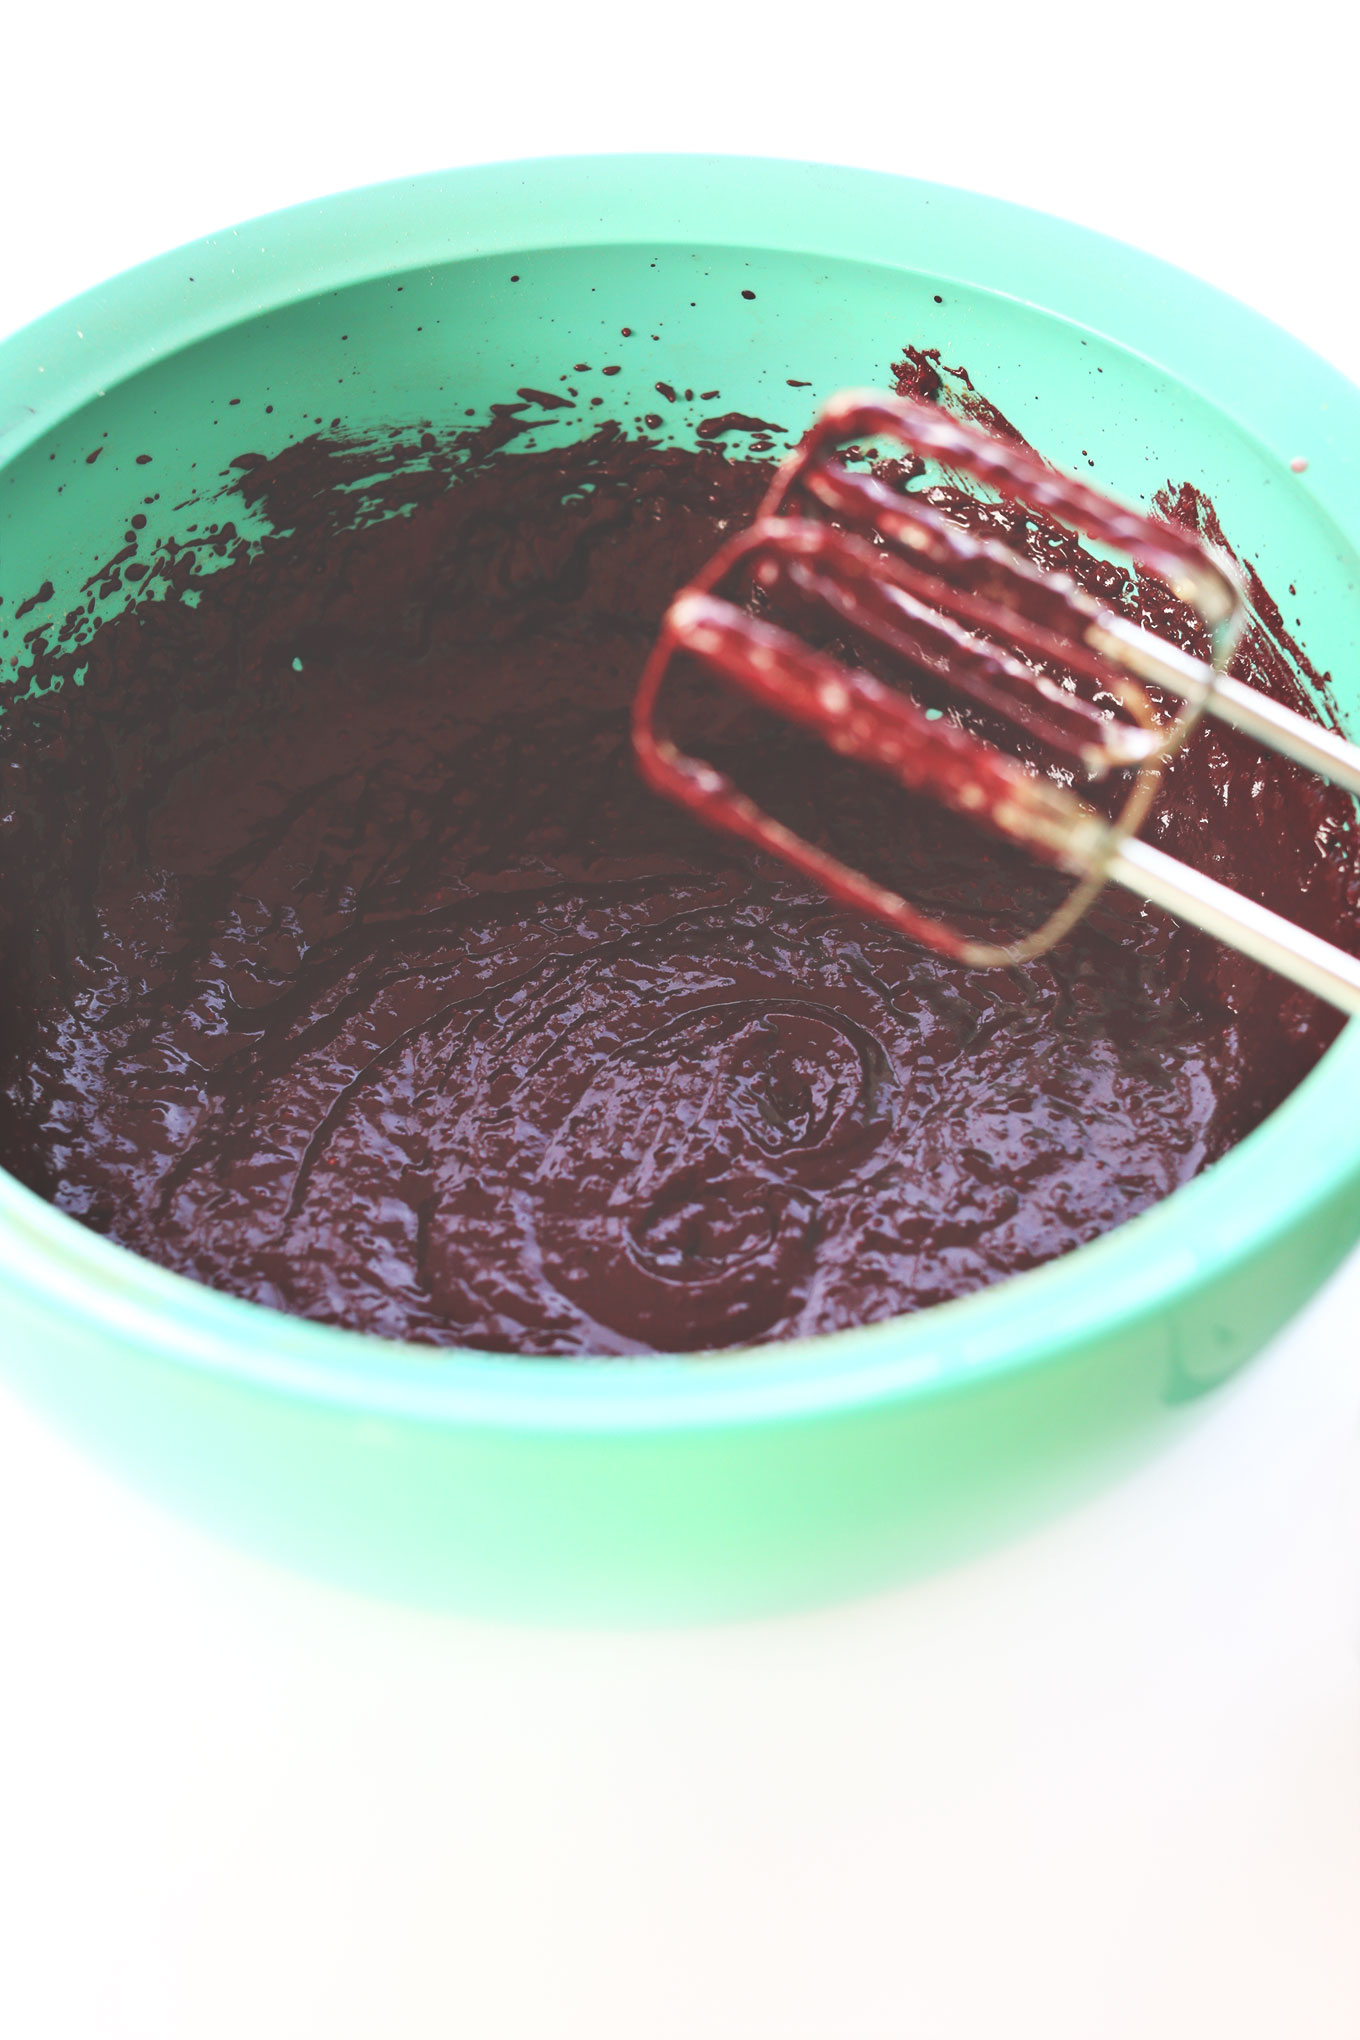 Bowl of Vegan Gluten-Free Chocolate Cupcake batter made with beets